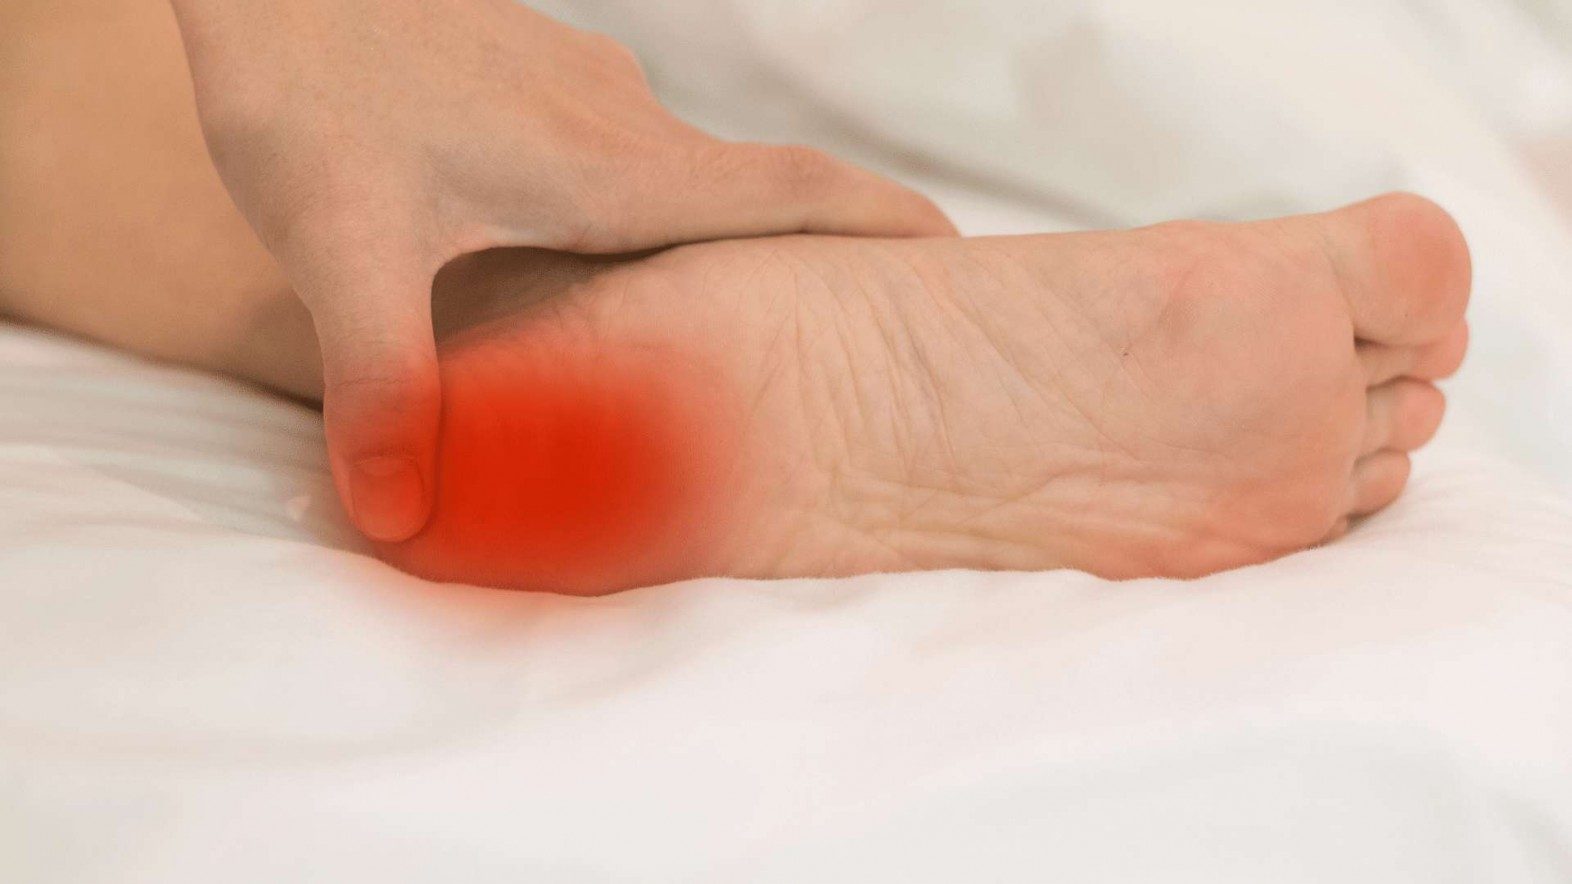 5 Steps to Decreasing the Pain and Discomfort of Plantar Fasciitis